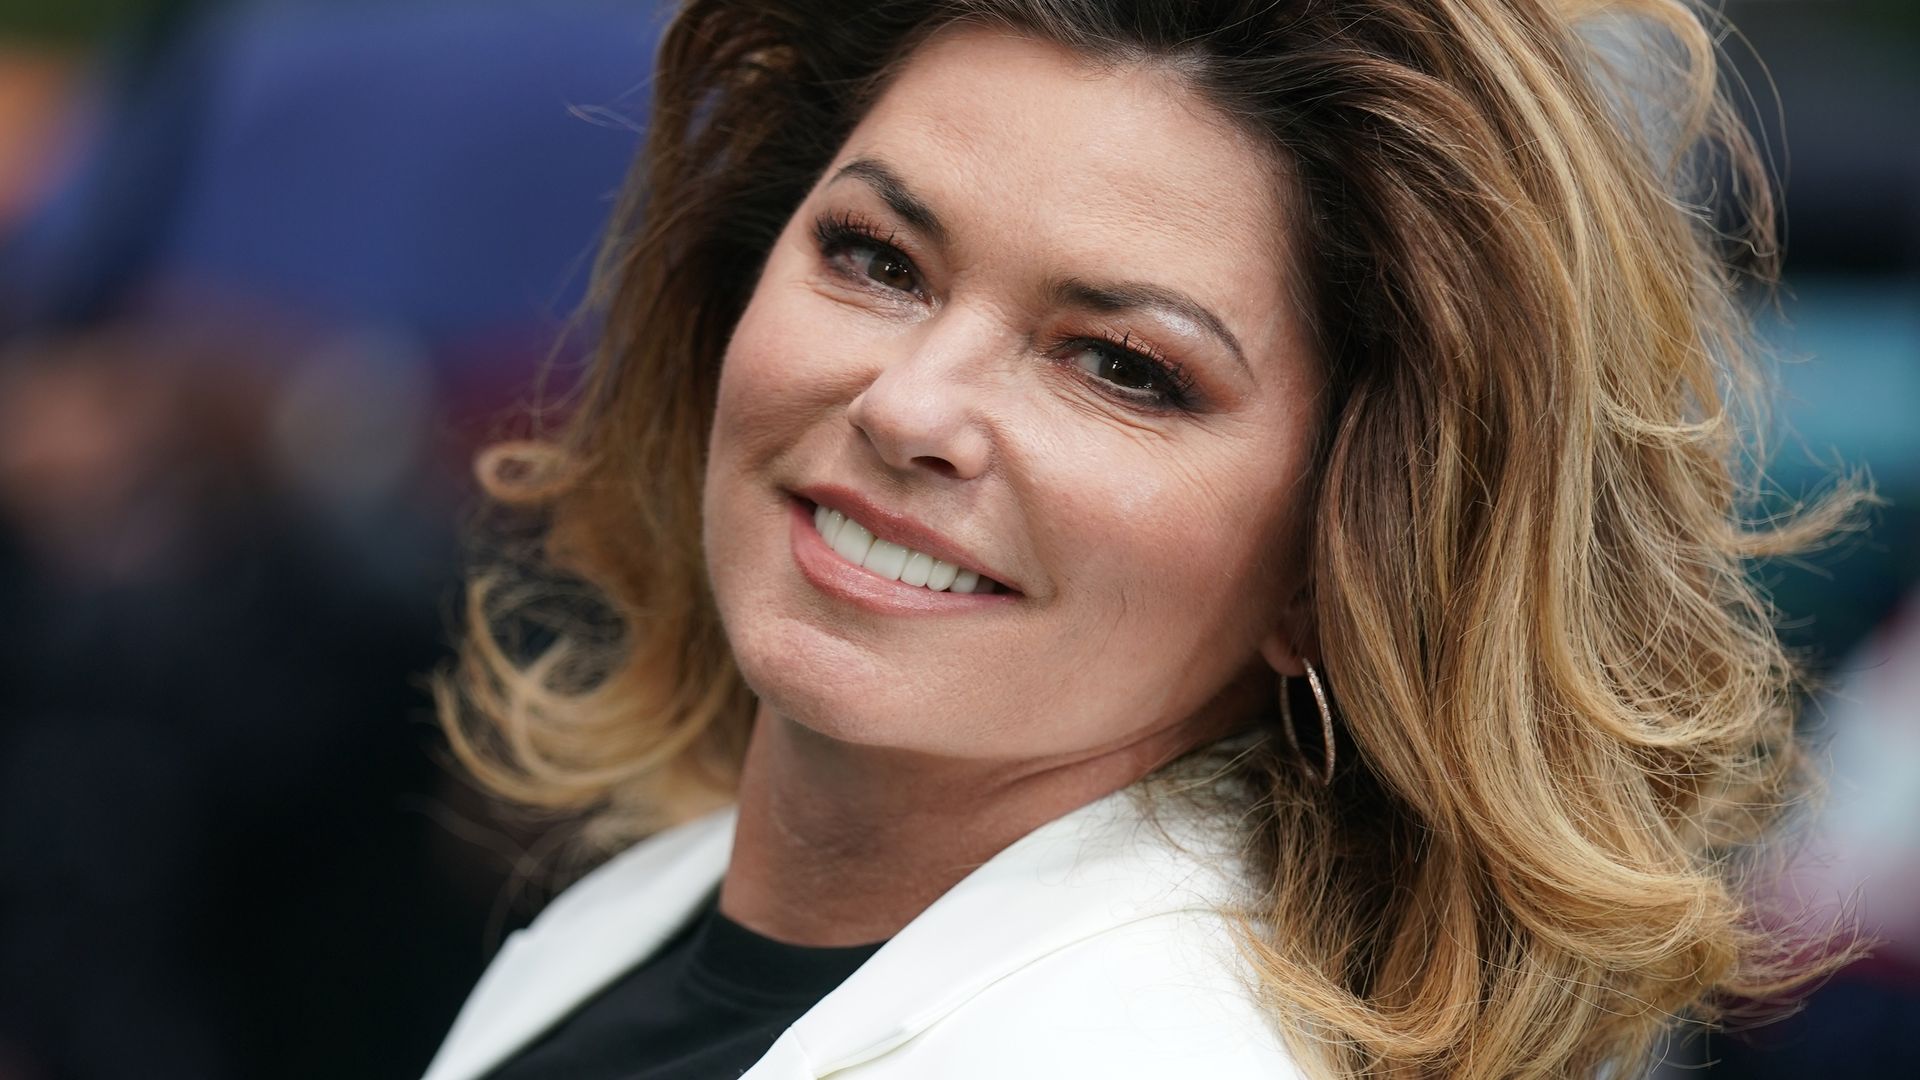 Shania Twain is almost unrecognizable with new look as she's compared to major star